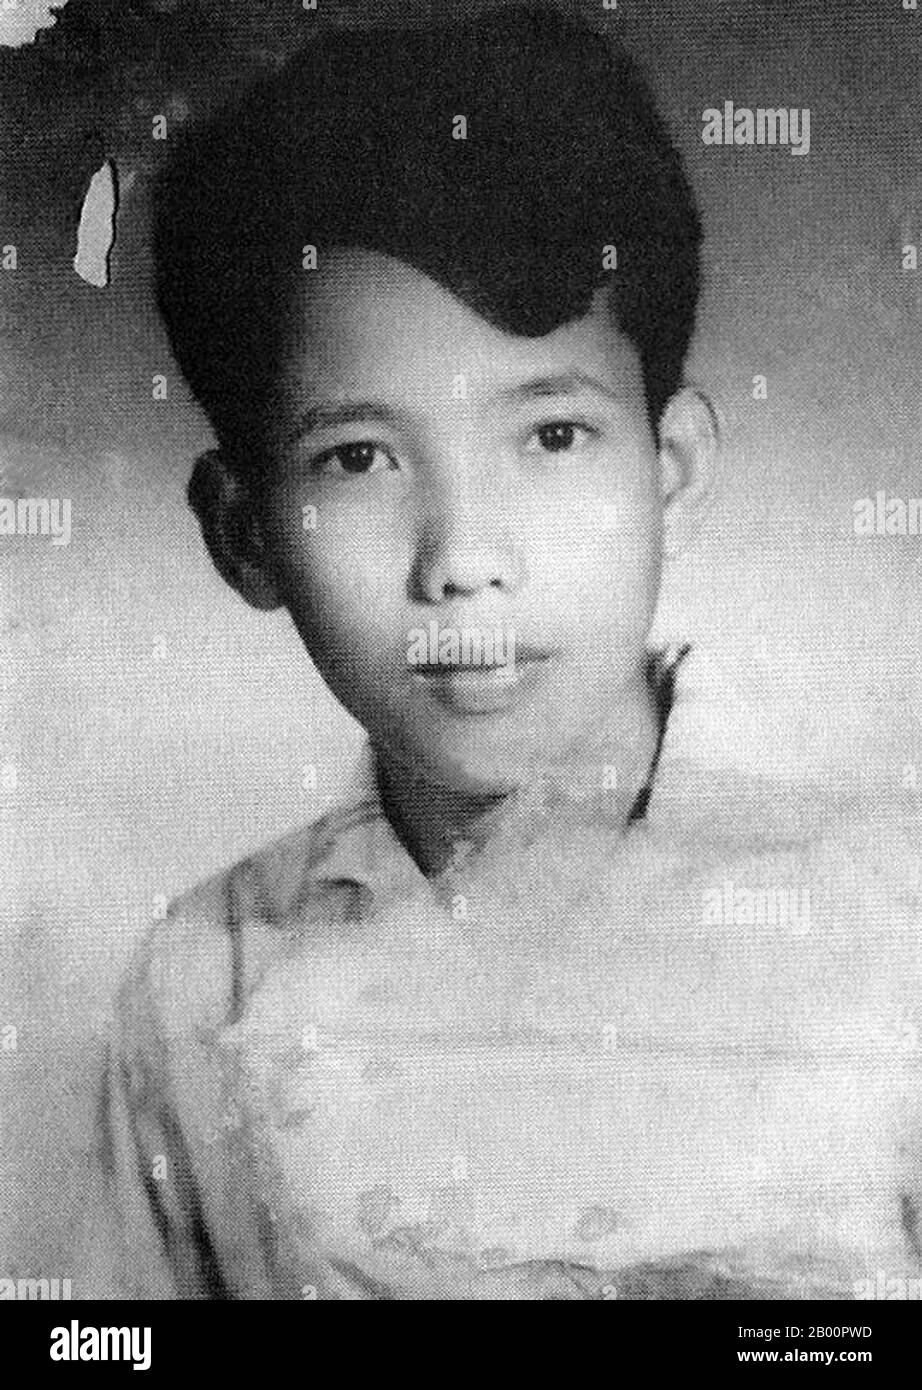 Cambodia: Kang Kek Iew (Comrade Duch), at the age of 17.  Kang Kek Iew or Kaing Kek Iev, Kaing Guek Eav (Comrade Duch or Deuch), a Sino-Khmer with the Chinese name Hang Pin, was born 17 November 1942 in Choyaot village, Kampong Chen subdistrict, Kampong Thom Province. He is best known for heading the Khmer Rouge special branch (Santebal) and running the infamous Tuol Sleng (S-21) prison camp in Phnom Penh. The first Khmer Rouge leader to be tried by the Extraordinary Chambers in the Courts of Cambodia for the crimes of the regime, he was convicted of crimes against humanity, murder and torture Stock Photo